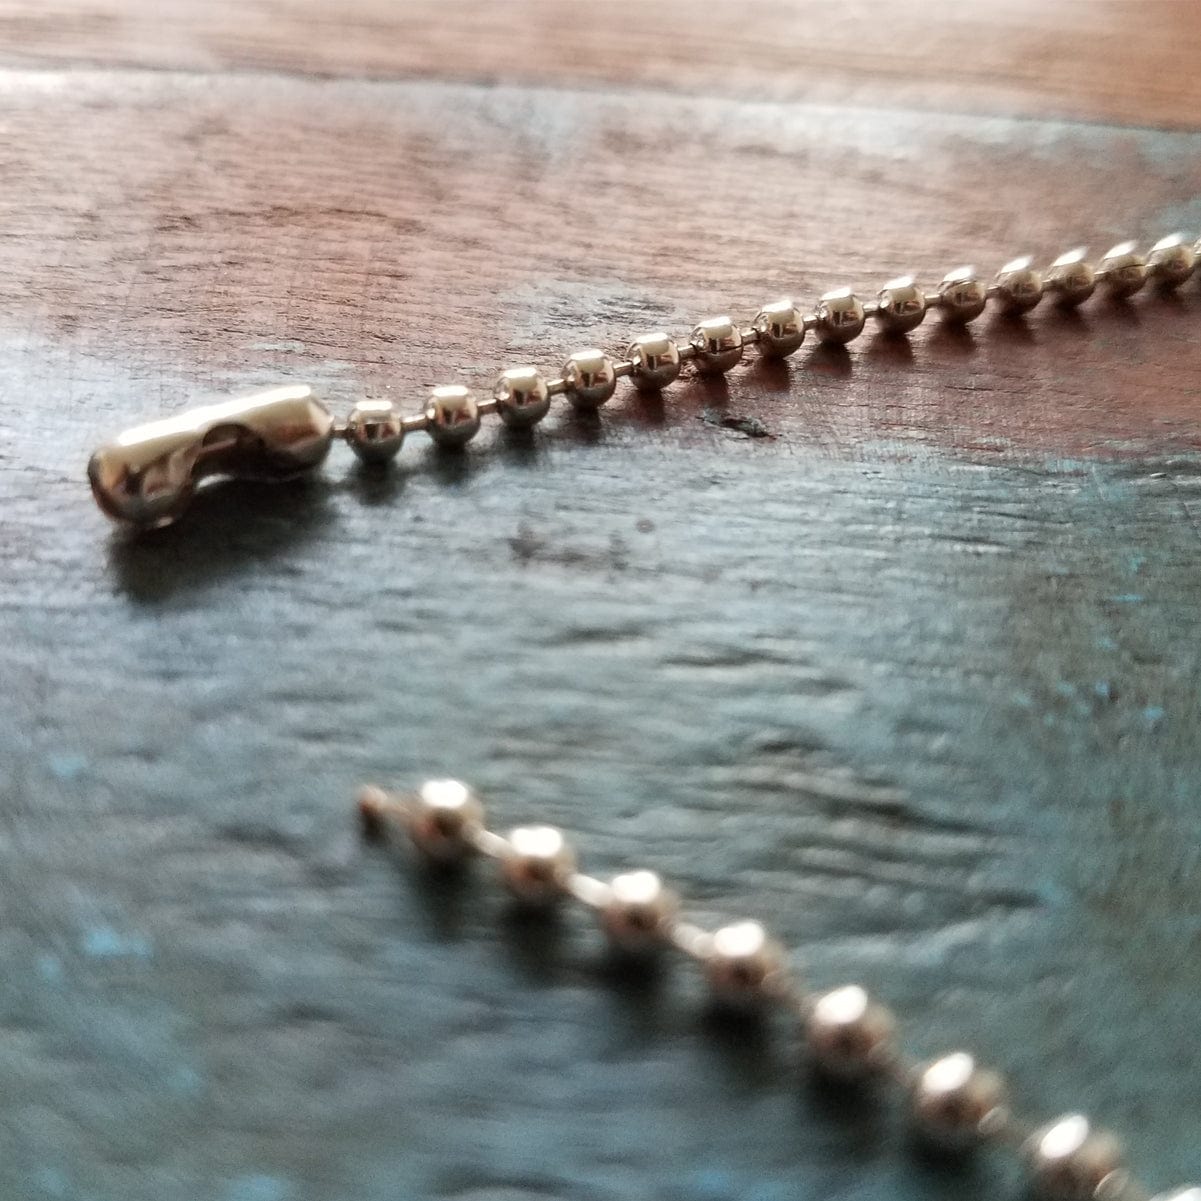 Nickel-Plated Steel Ball Chain, 4, No. 3 Bead Size (P/N 2450-1050